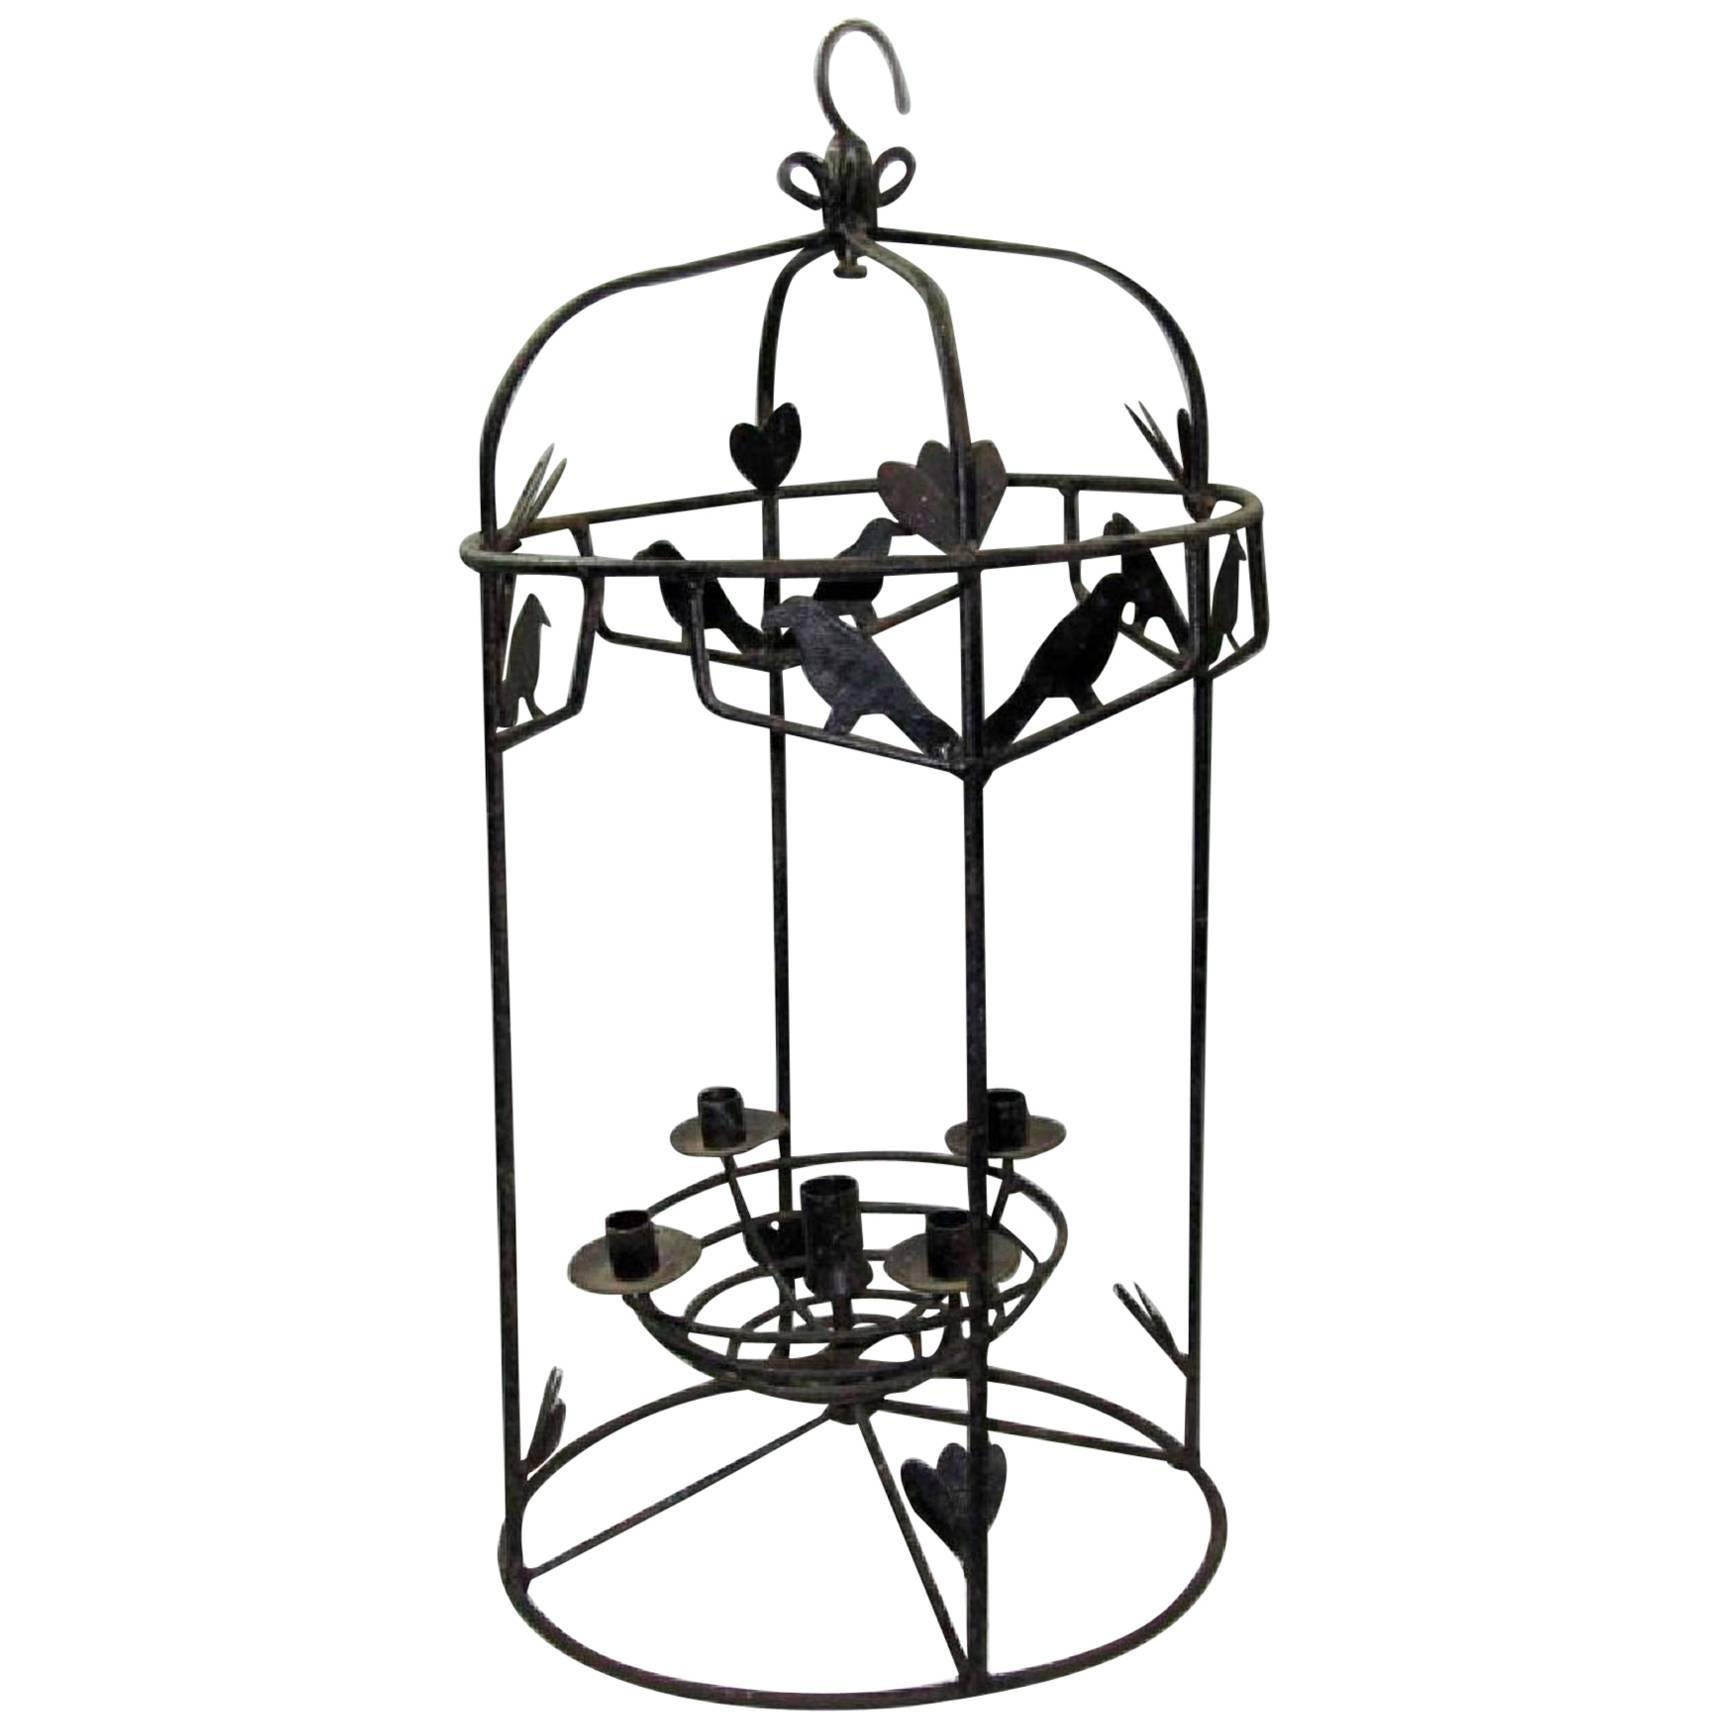 Five-Light Wrought Iron Chandelier with Birds